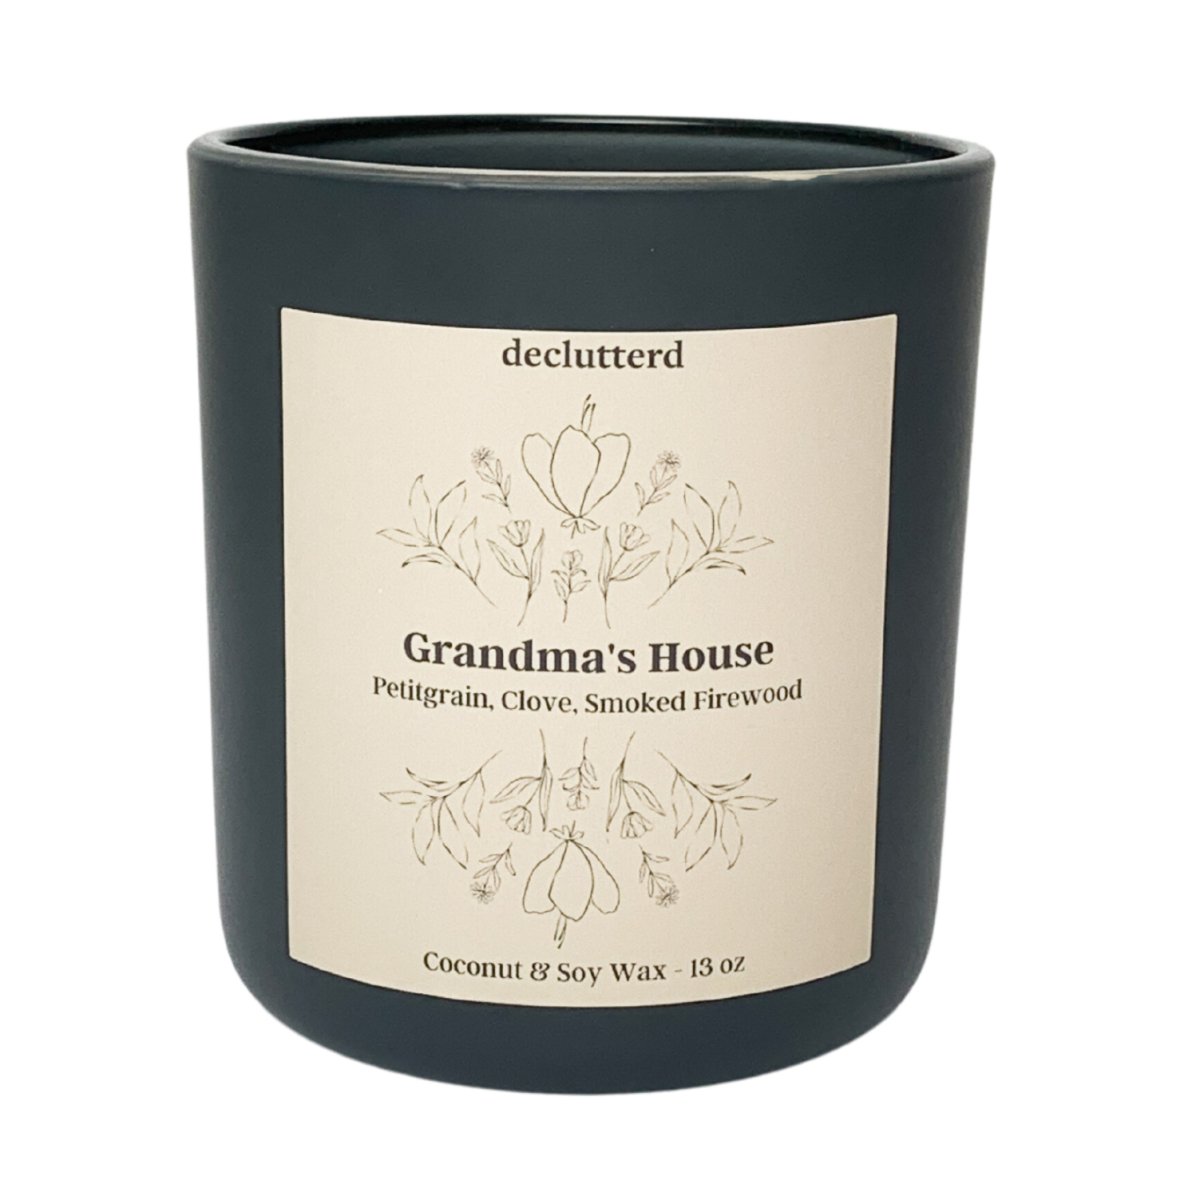 declutterd Grandma's House Wood Wick Candle - lily & onyx